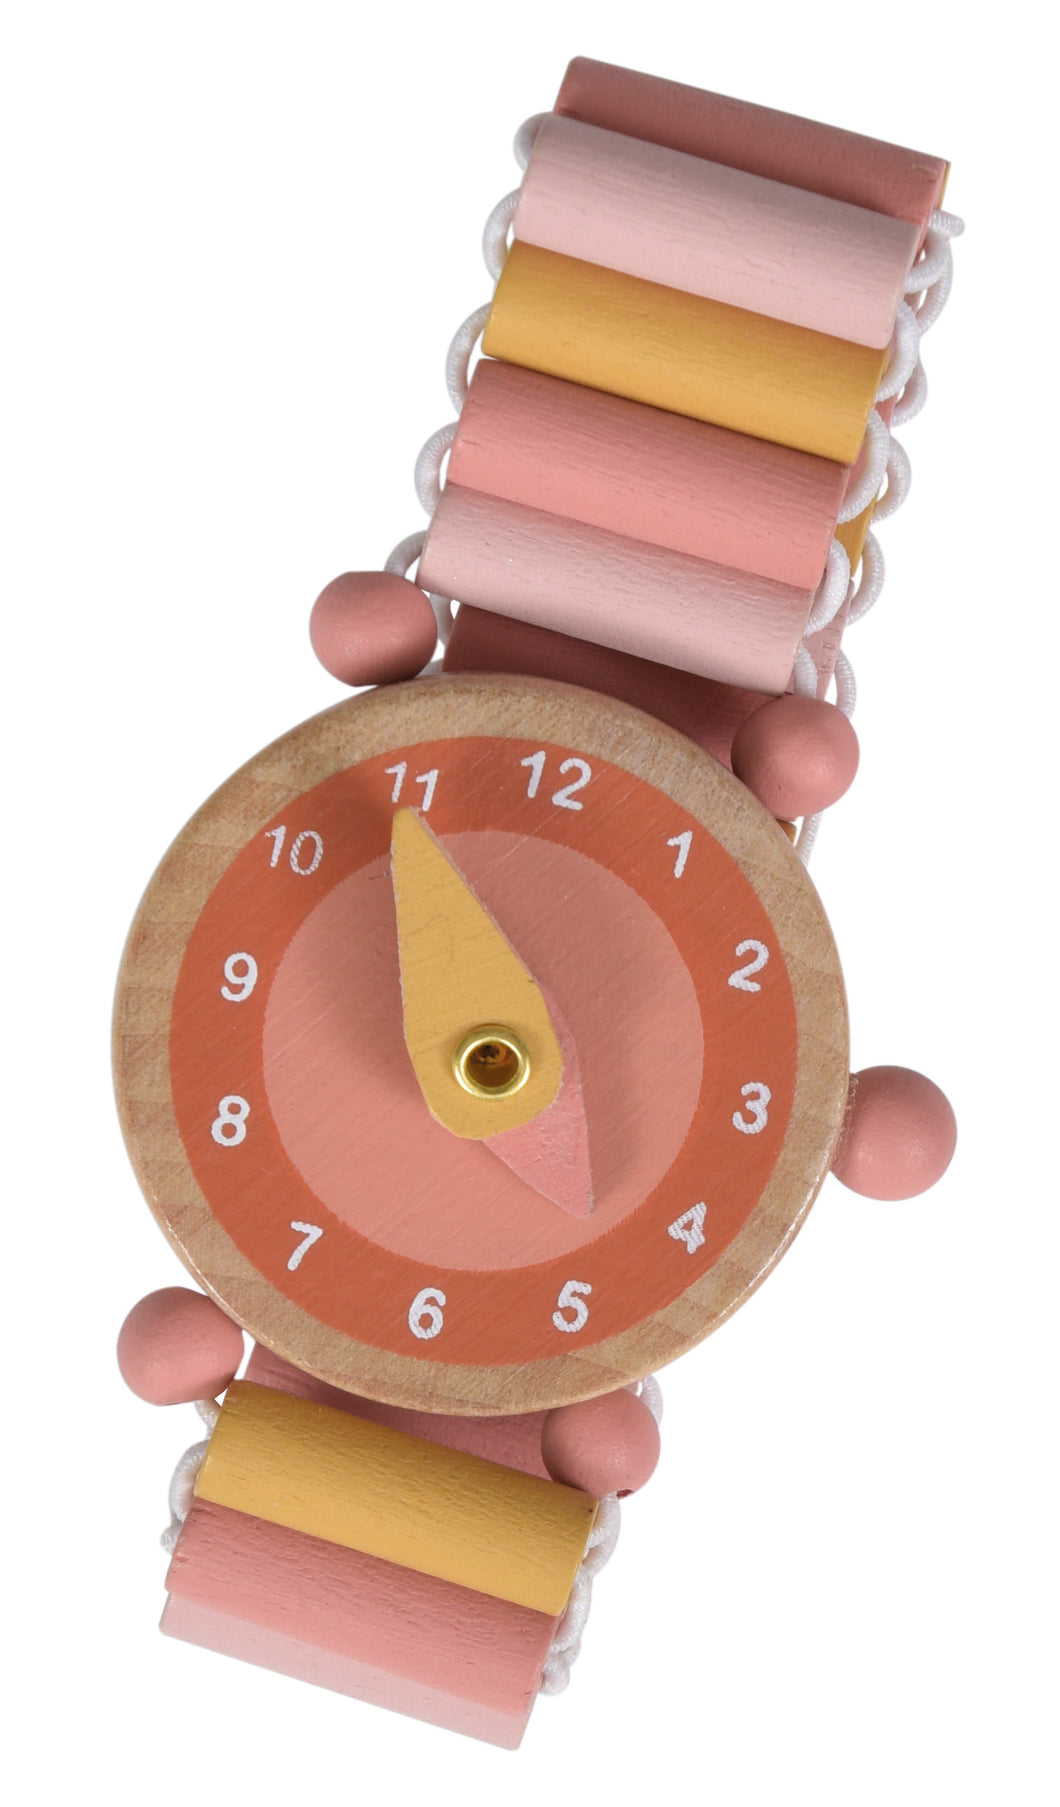 Les Petits by Egmont Toys Wooden Watch Emma